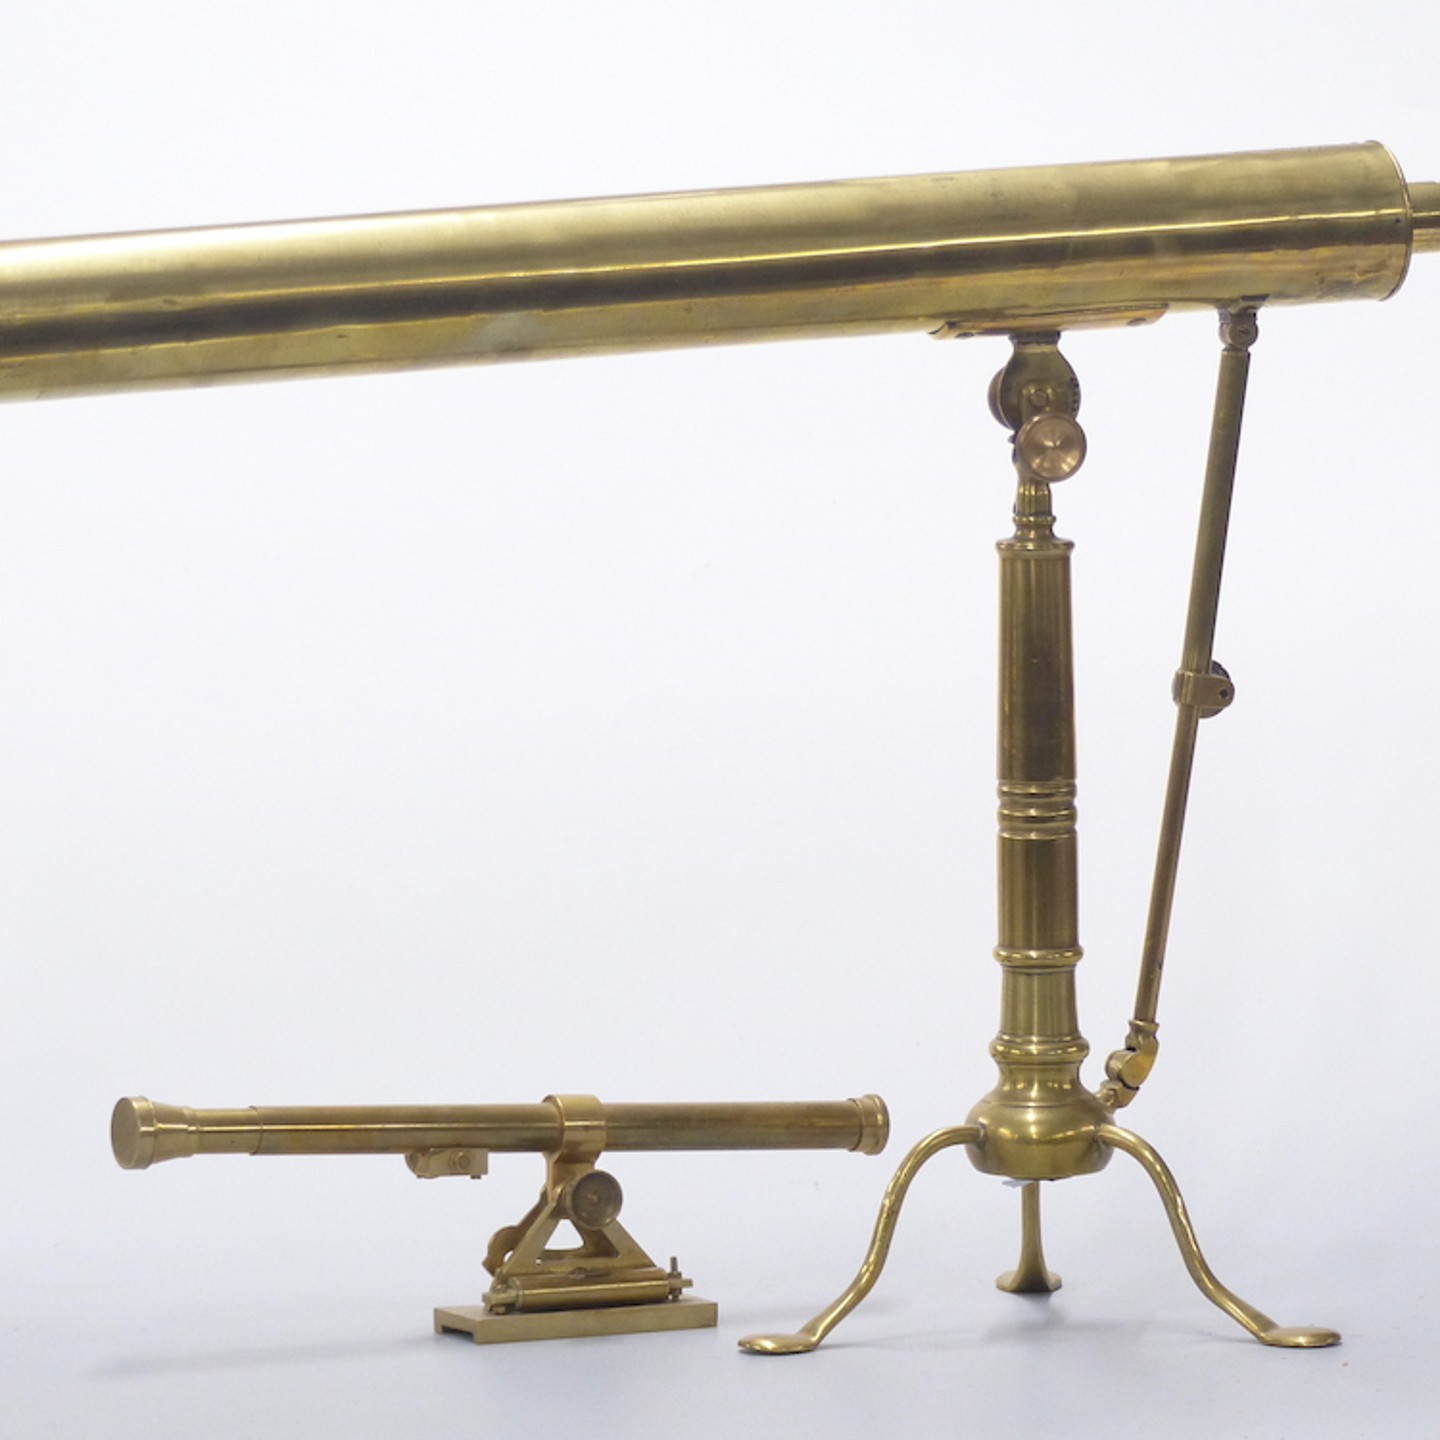 Georgian Ramsden London Brass Refractor Telescope On Adjustable Tripod Stand, Together With A Brass Clinometer Or Similar Sighting Sold For £550